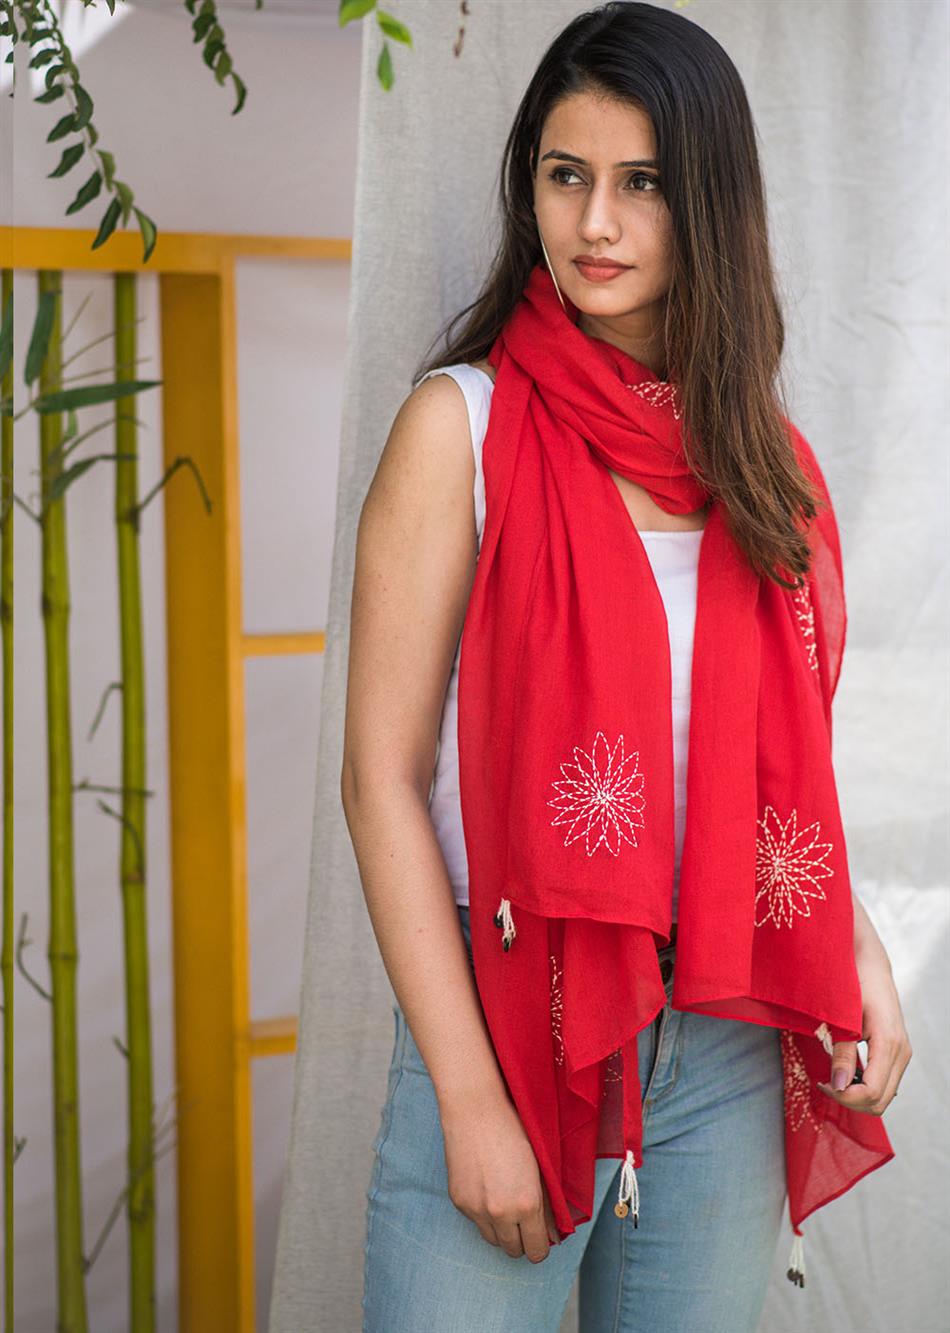 Balletic Mood - Red (Hand Embroidered Scarf)